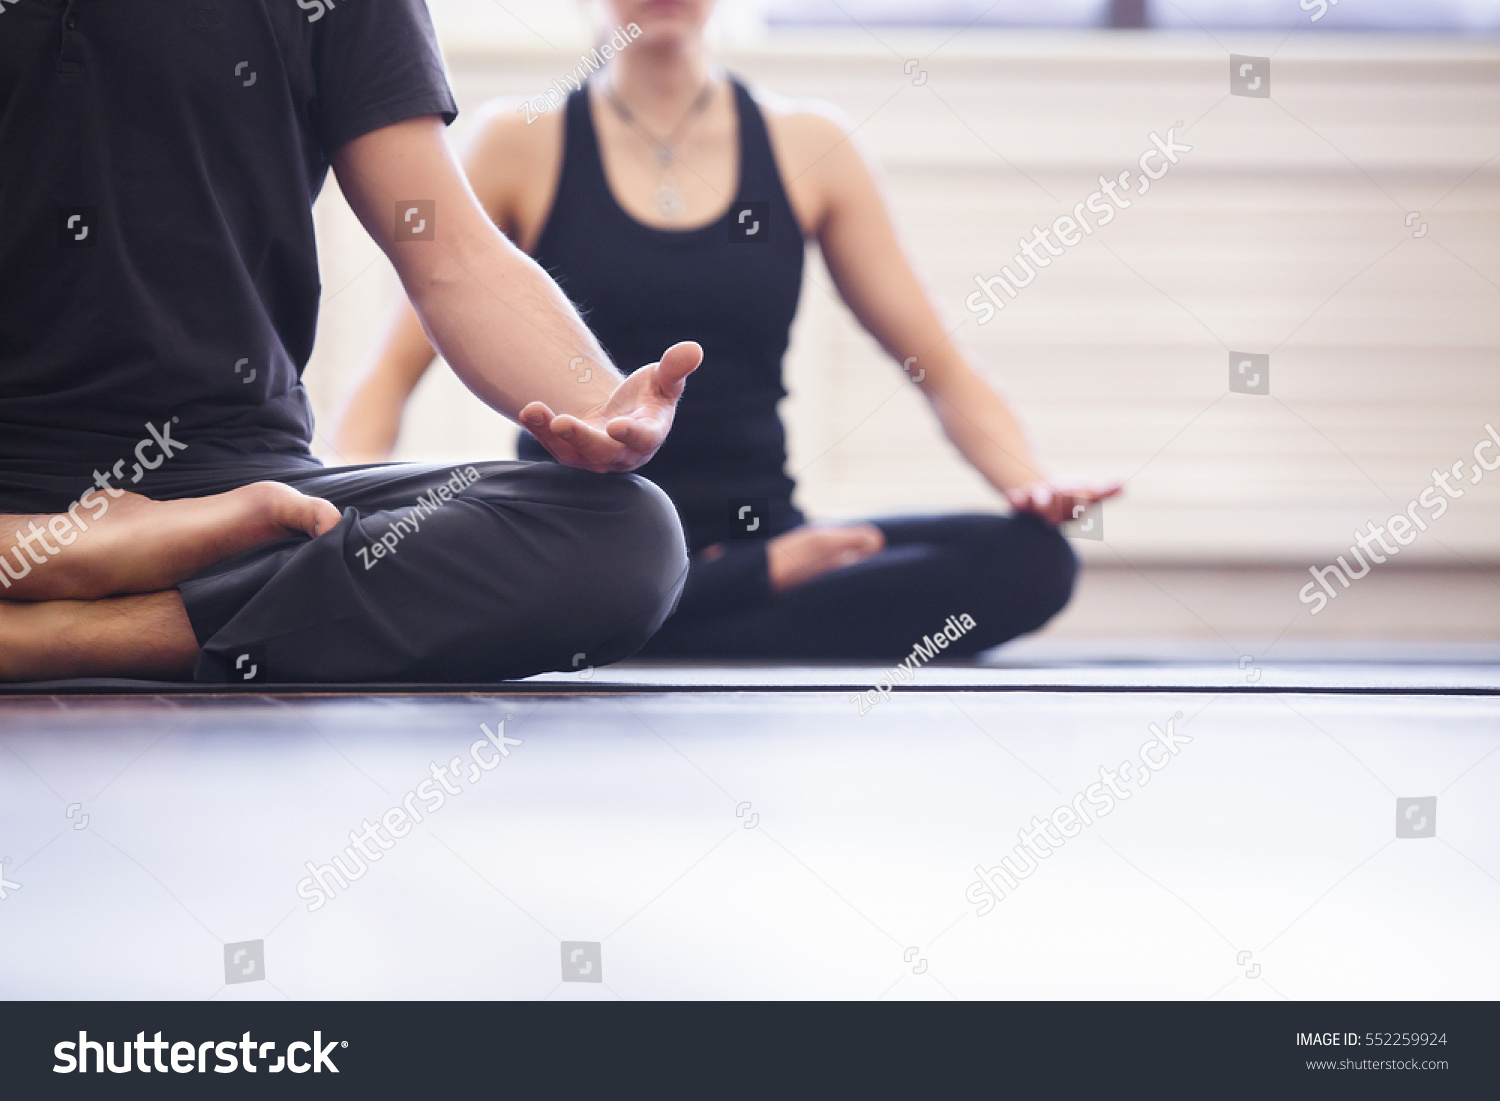 Yoga group concept. Young couple meditating together, sitting back to back on windows background, copy space #552259924